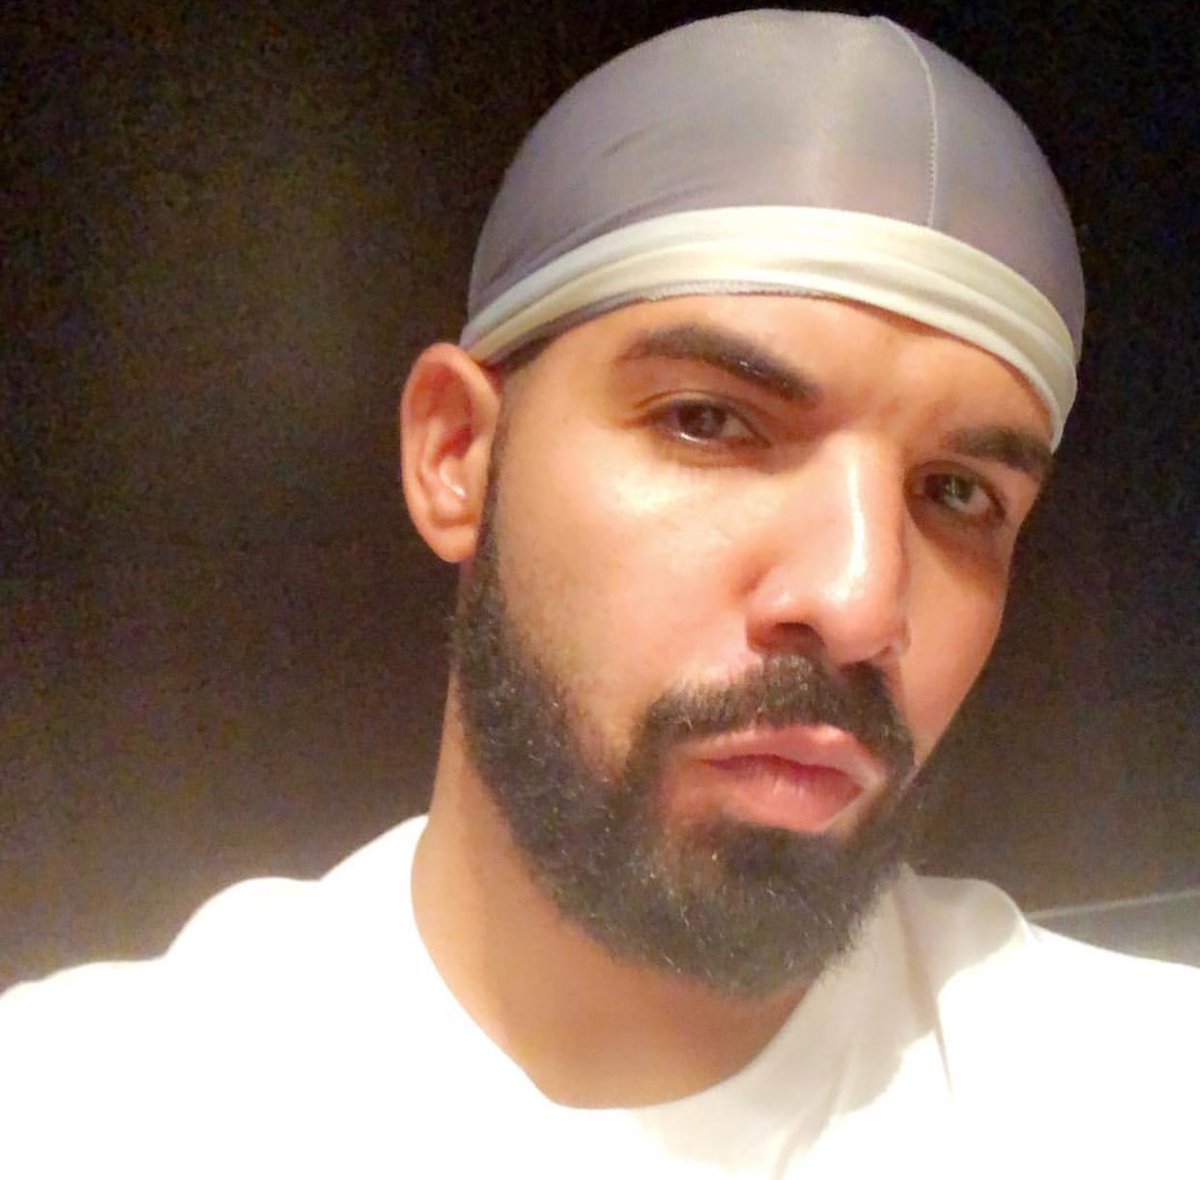 Yo so the double durag is the key to success? | Page 2 | Sports, Hip ...